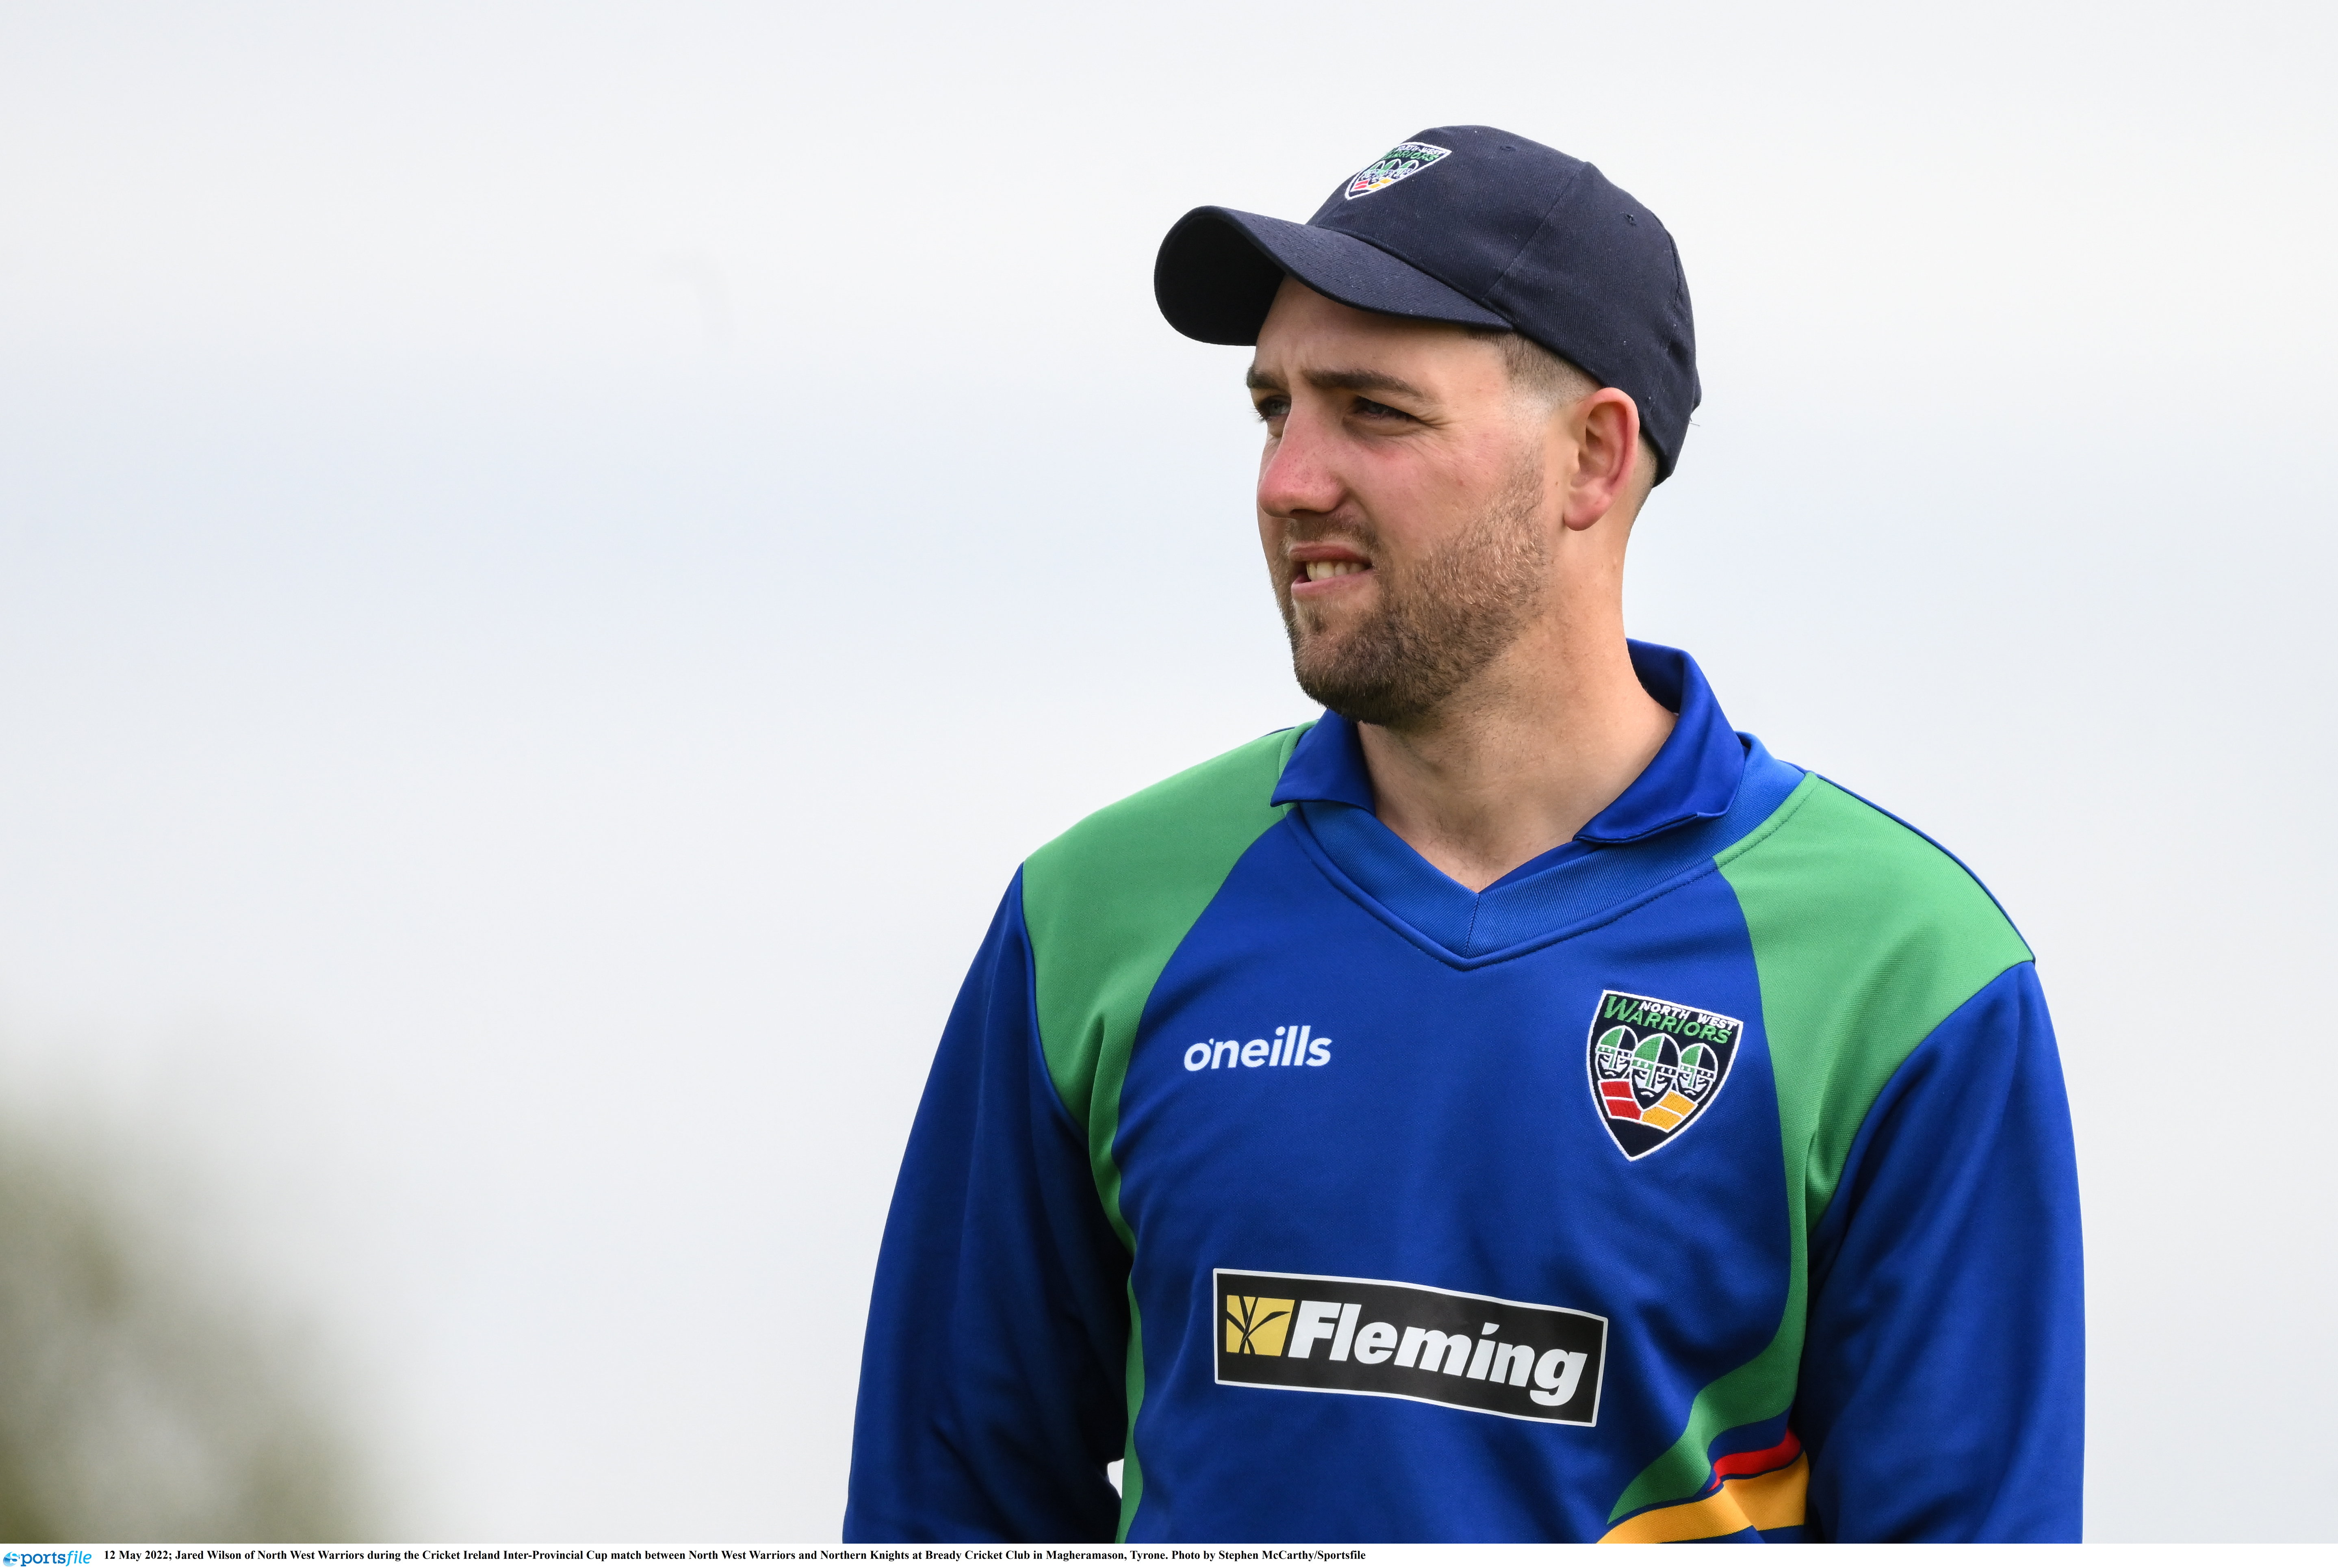 Cricket Ireland: Squad changes, fixture schedule and broadcast details for Ireland Academy at the 2022 ECC